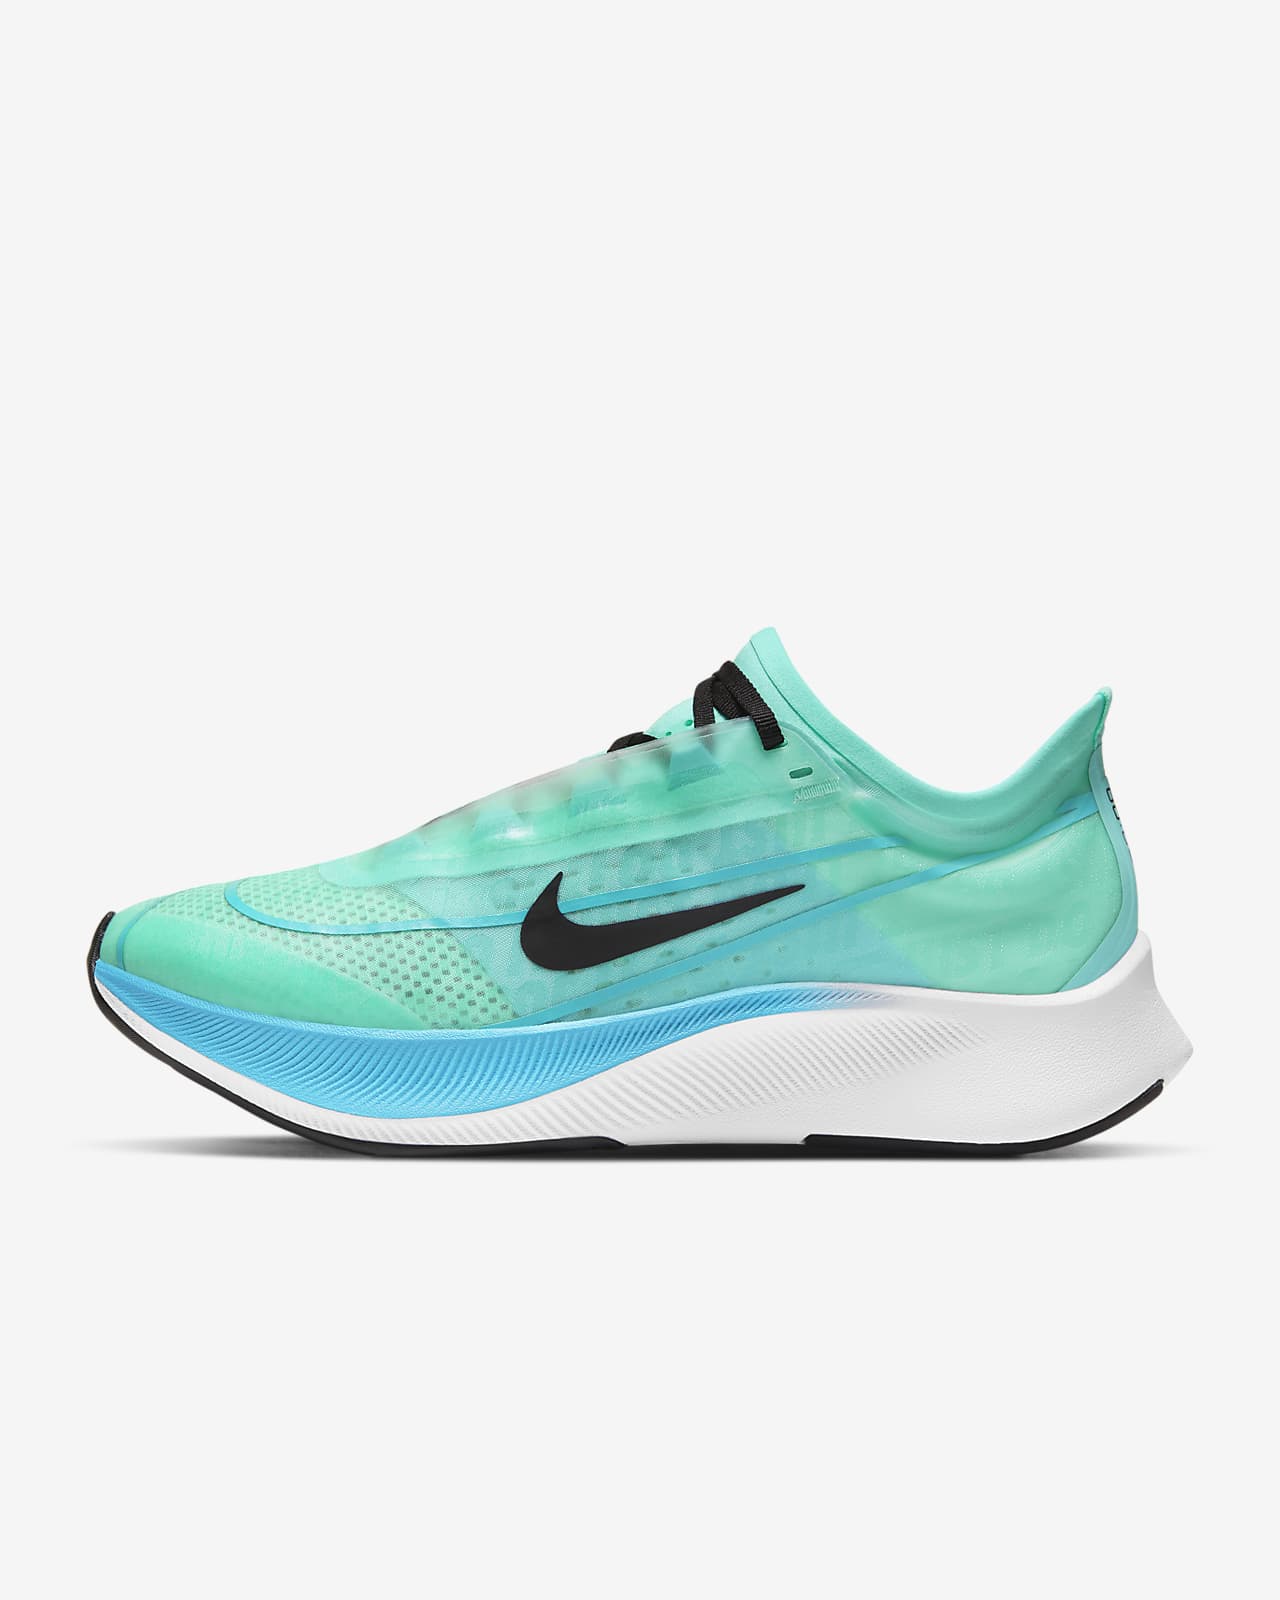 Nike Zoom Fly 3 Women's Road Running Shoes